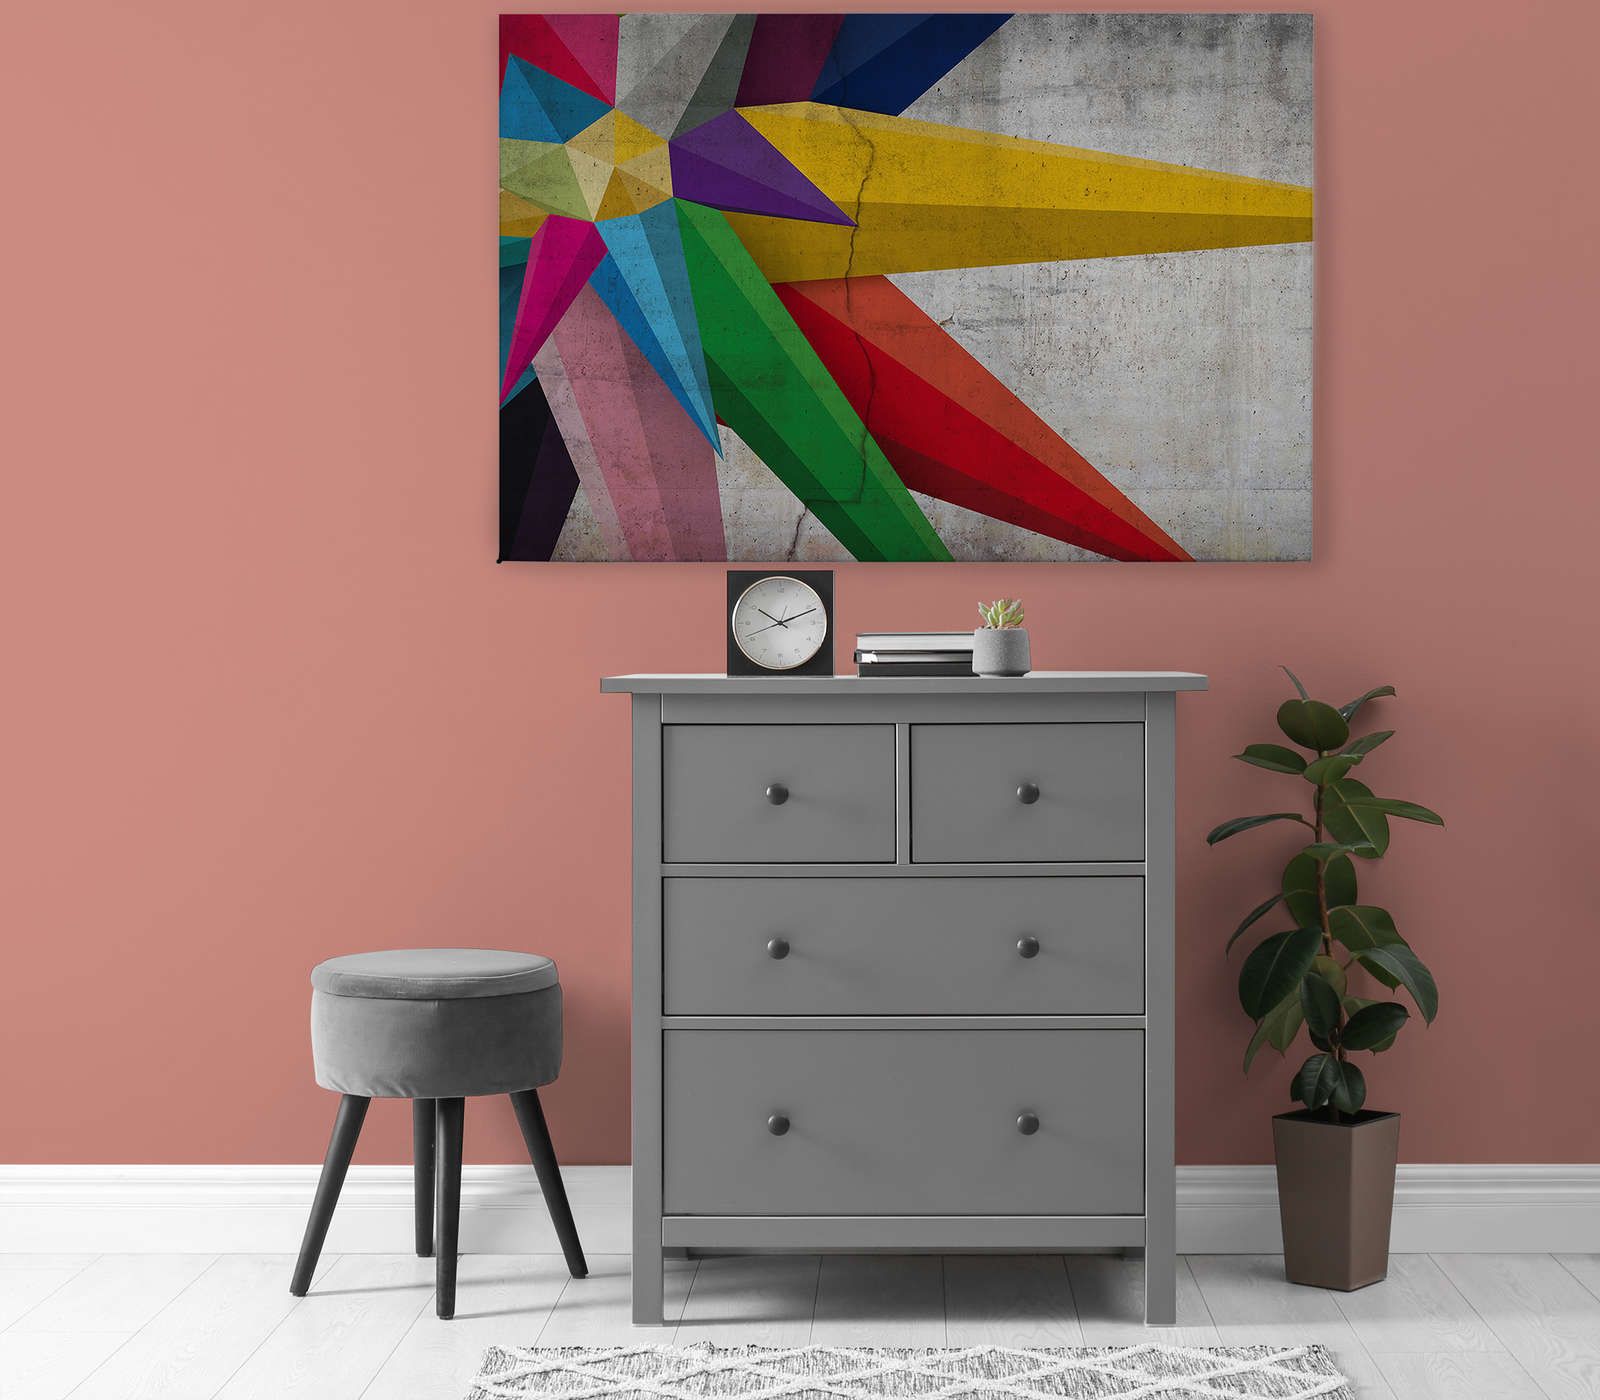             Concrete Canvas Painting with Polygon Style Star Graphic - 1.20 m x 0.80 m
        